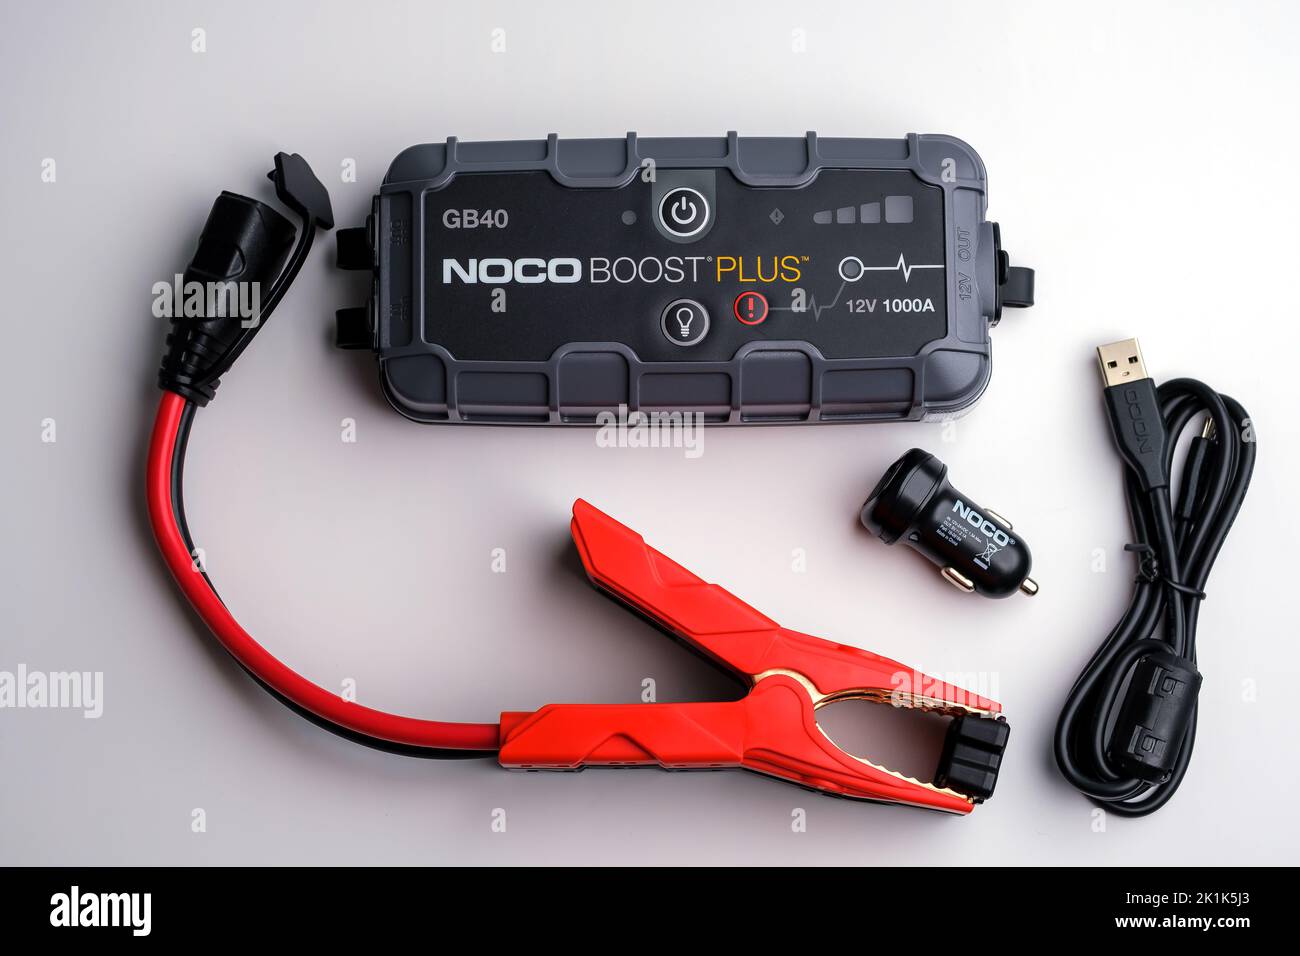 Car Jump Starter Noco Boost Plus GB40, and the content of the product box. Car battery starter kit. Stafford, United Kingdom, September 19, 2022. Stock Photo